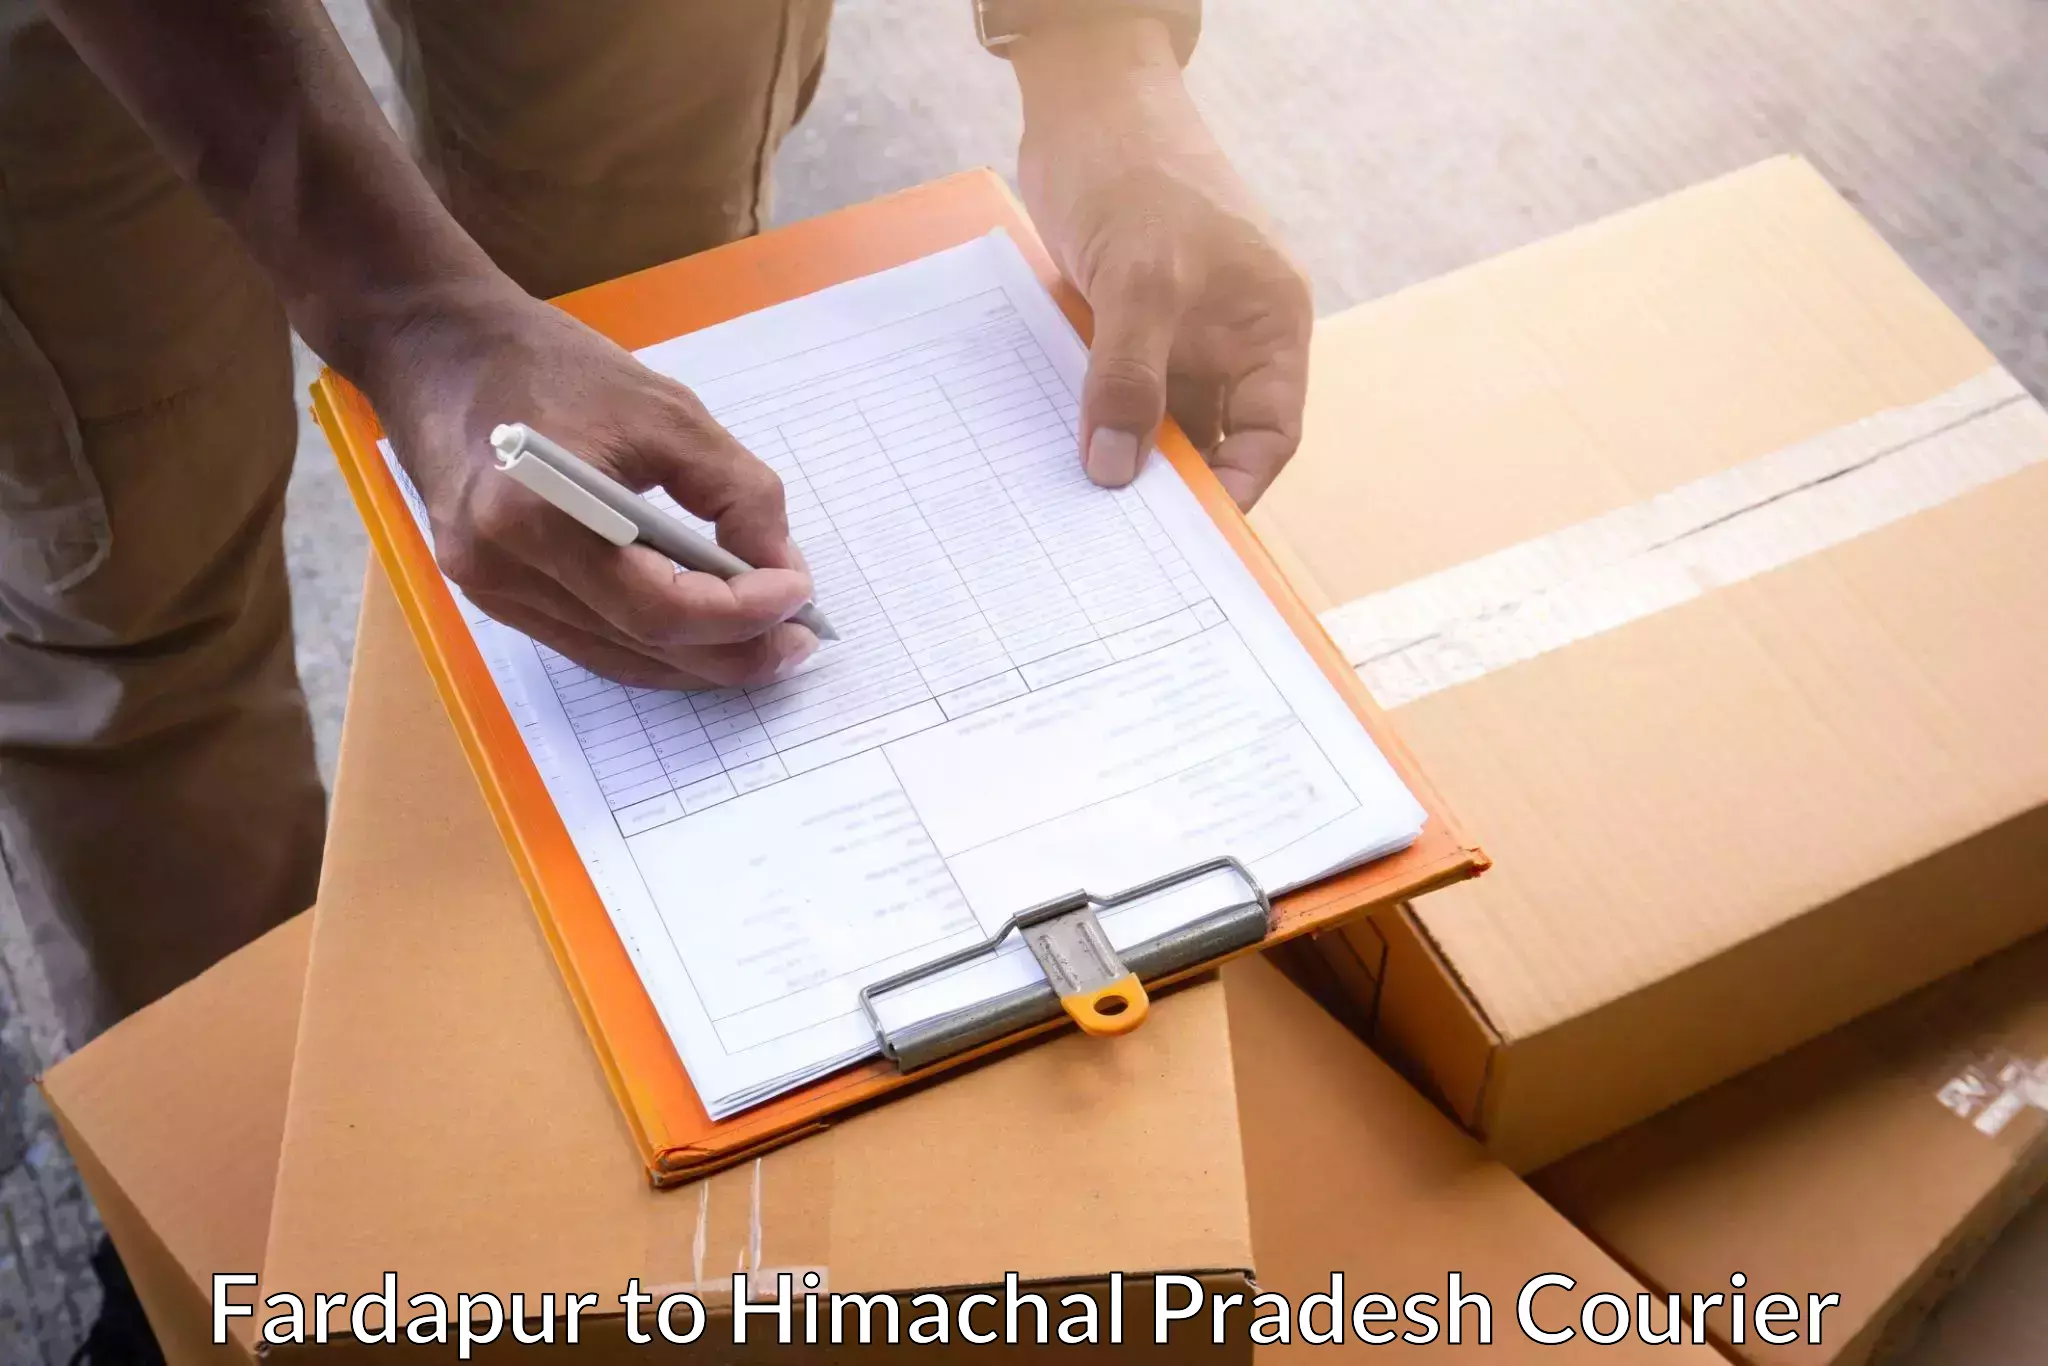 Advanced package delivery in Fardapur to Himachal Pradesh